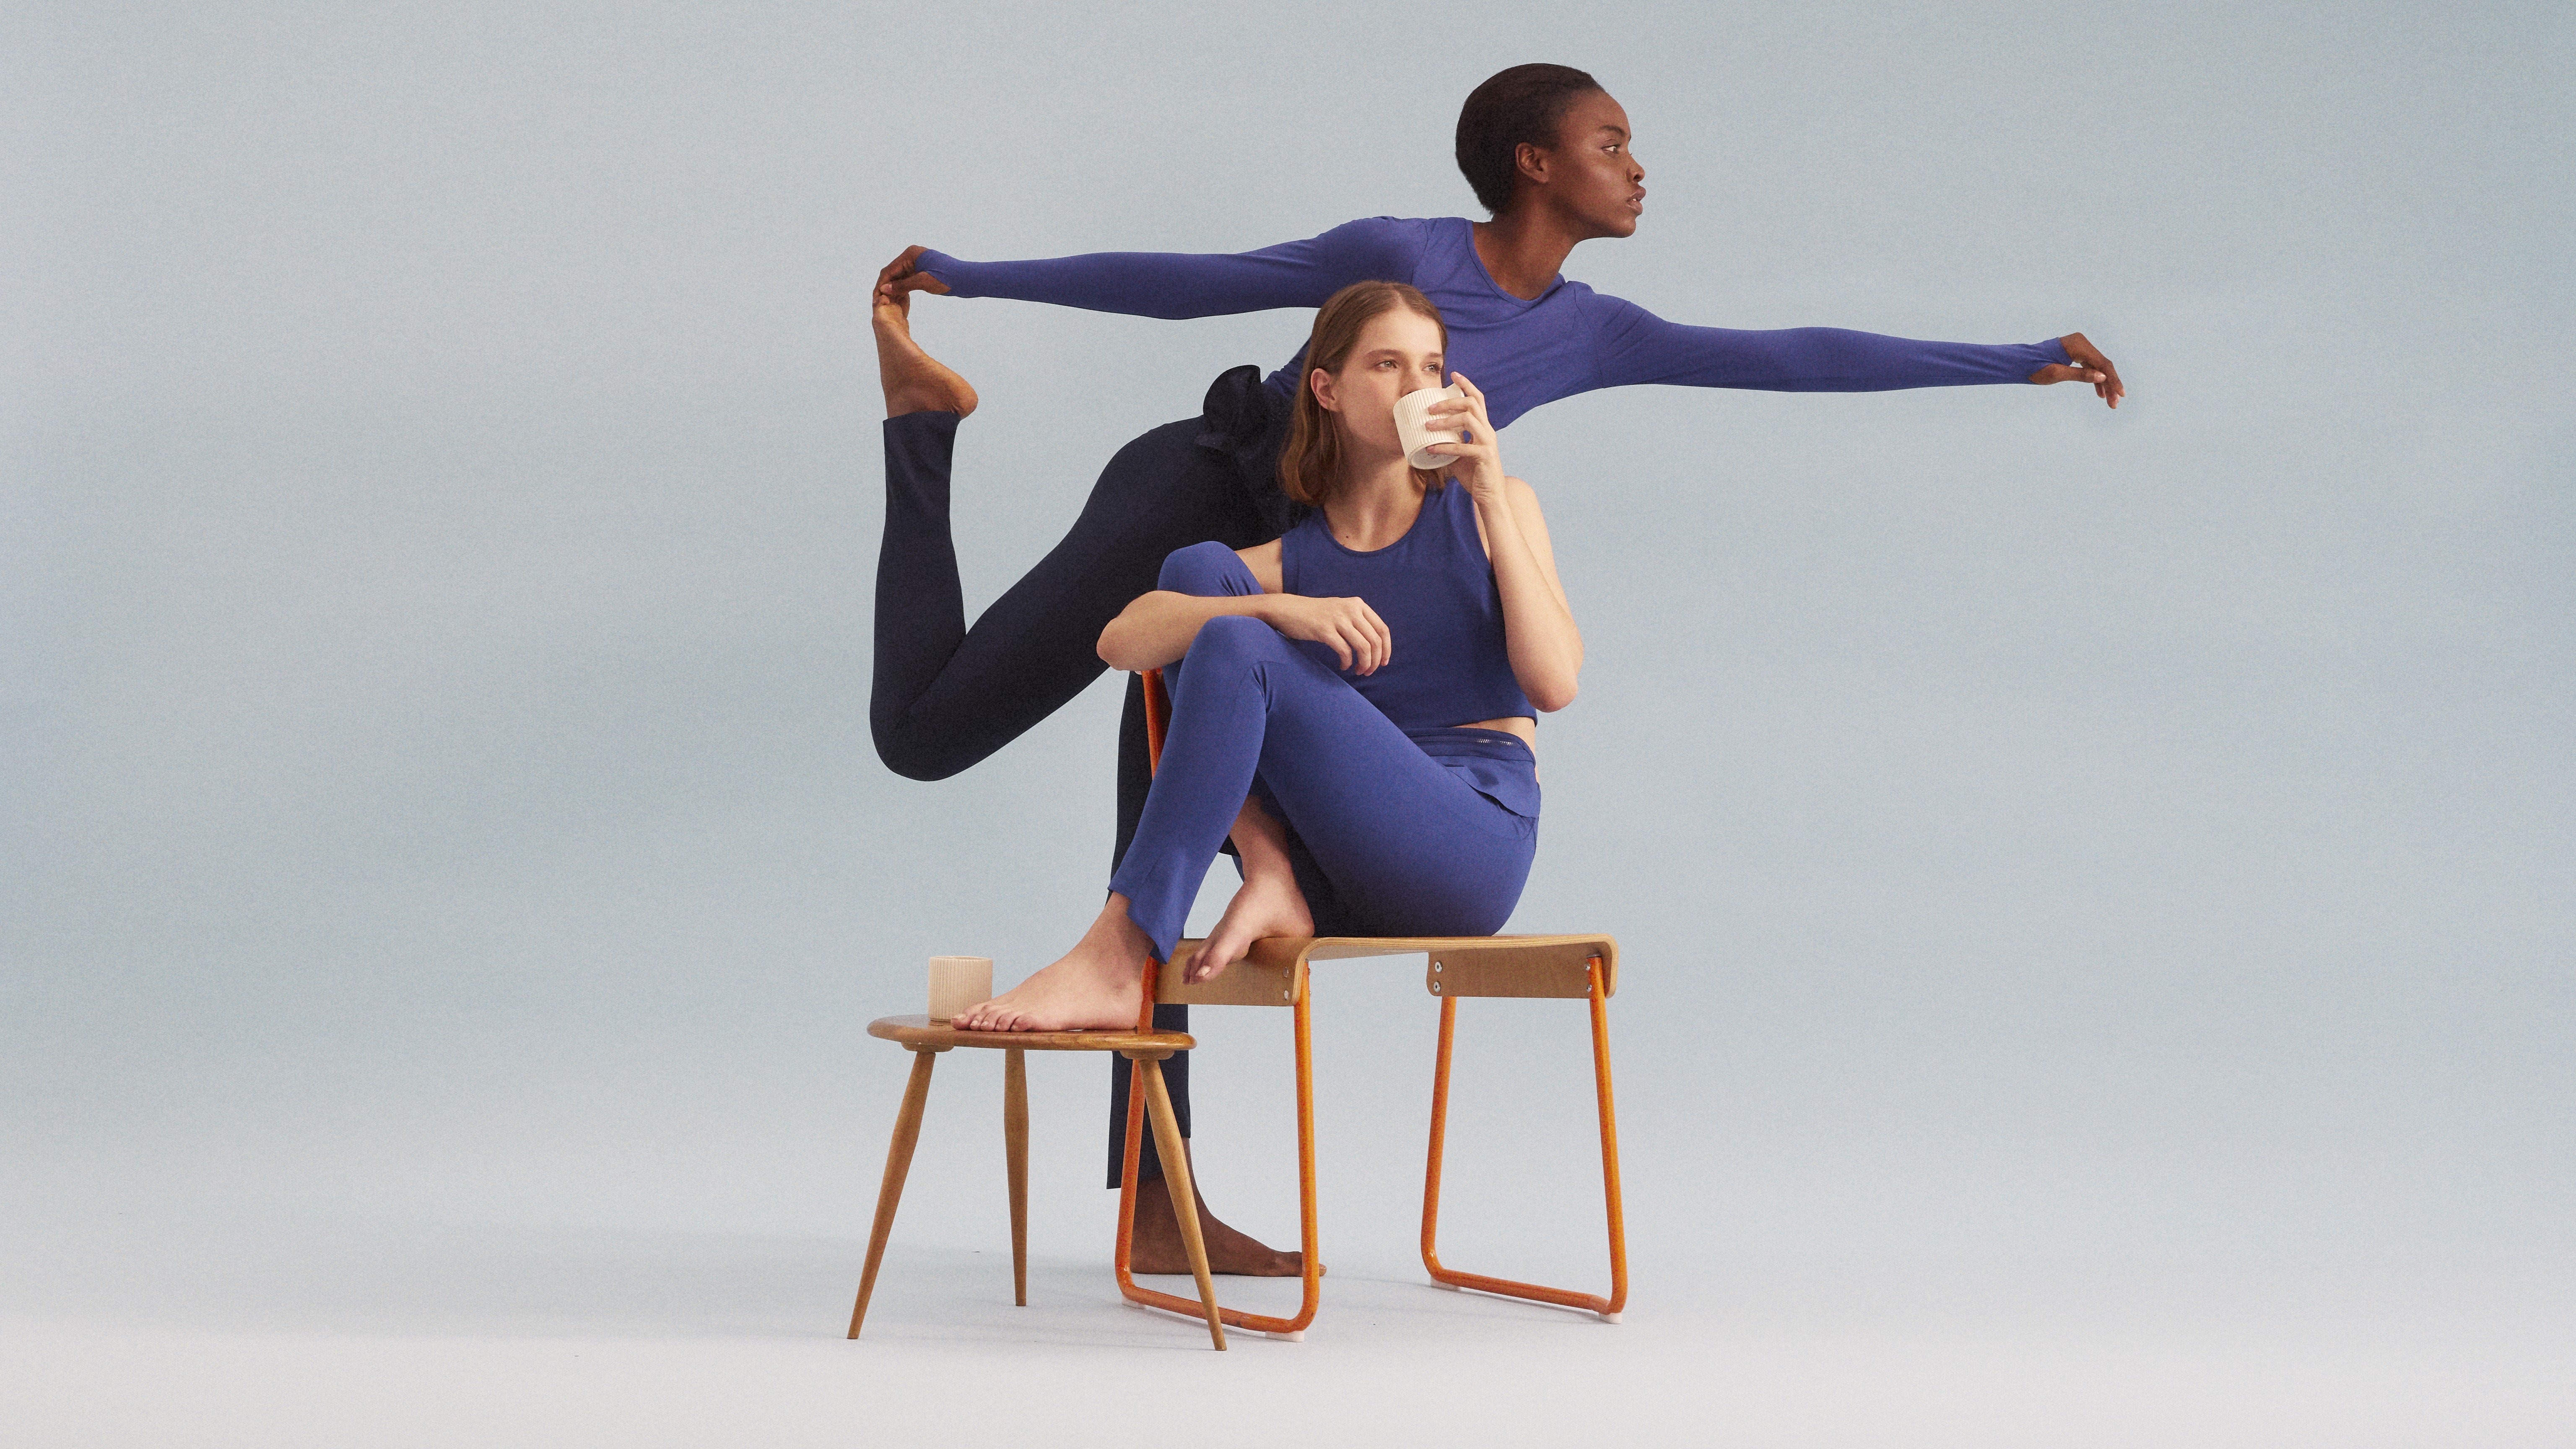 Wear the same clothes from morning yoga to evening cocktails – new